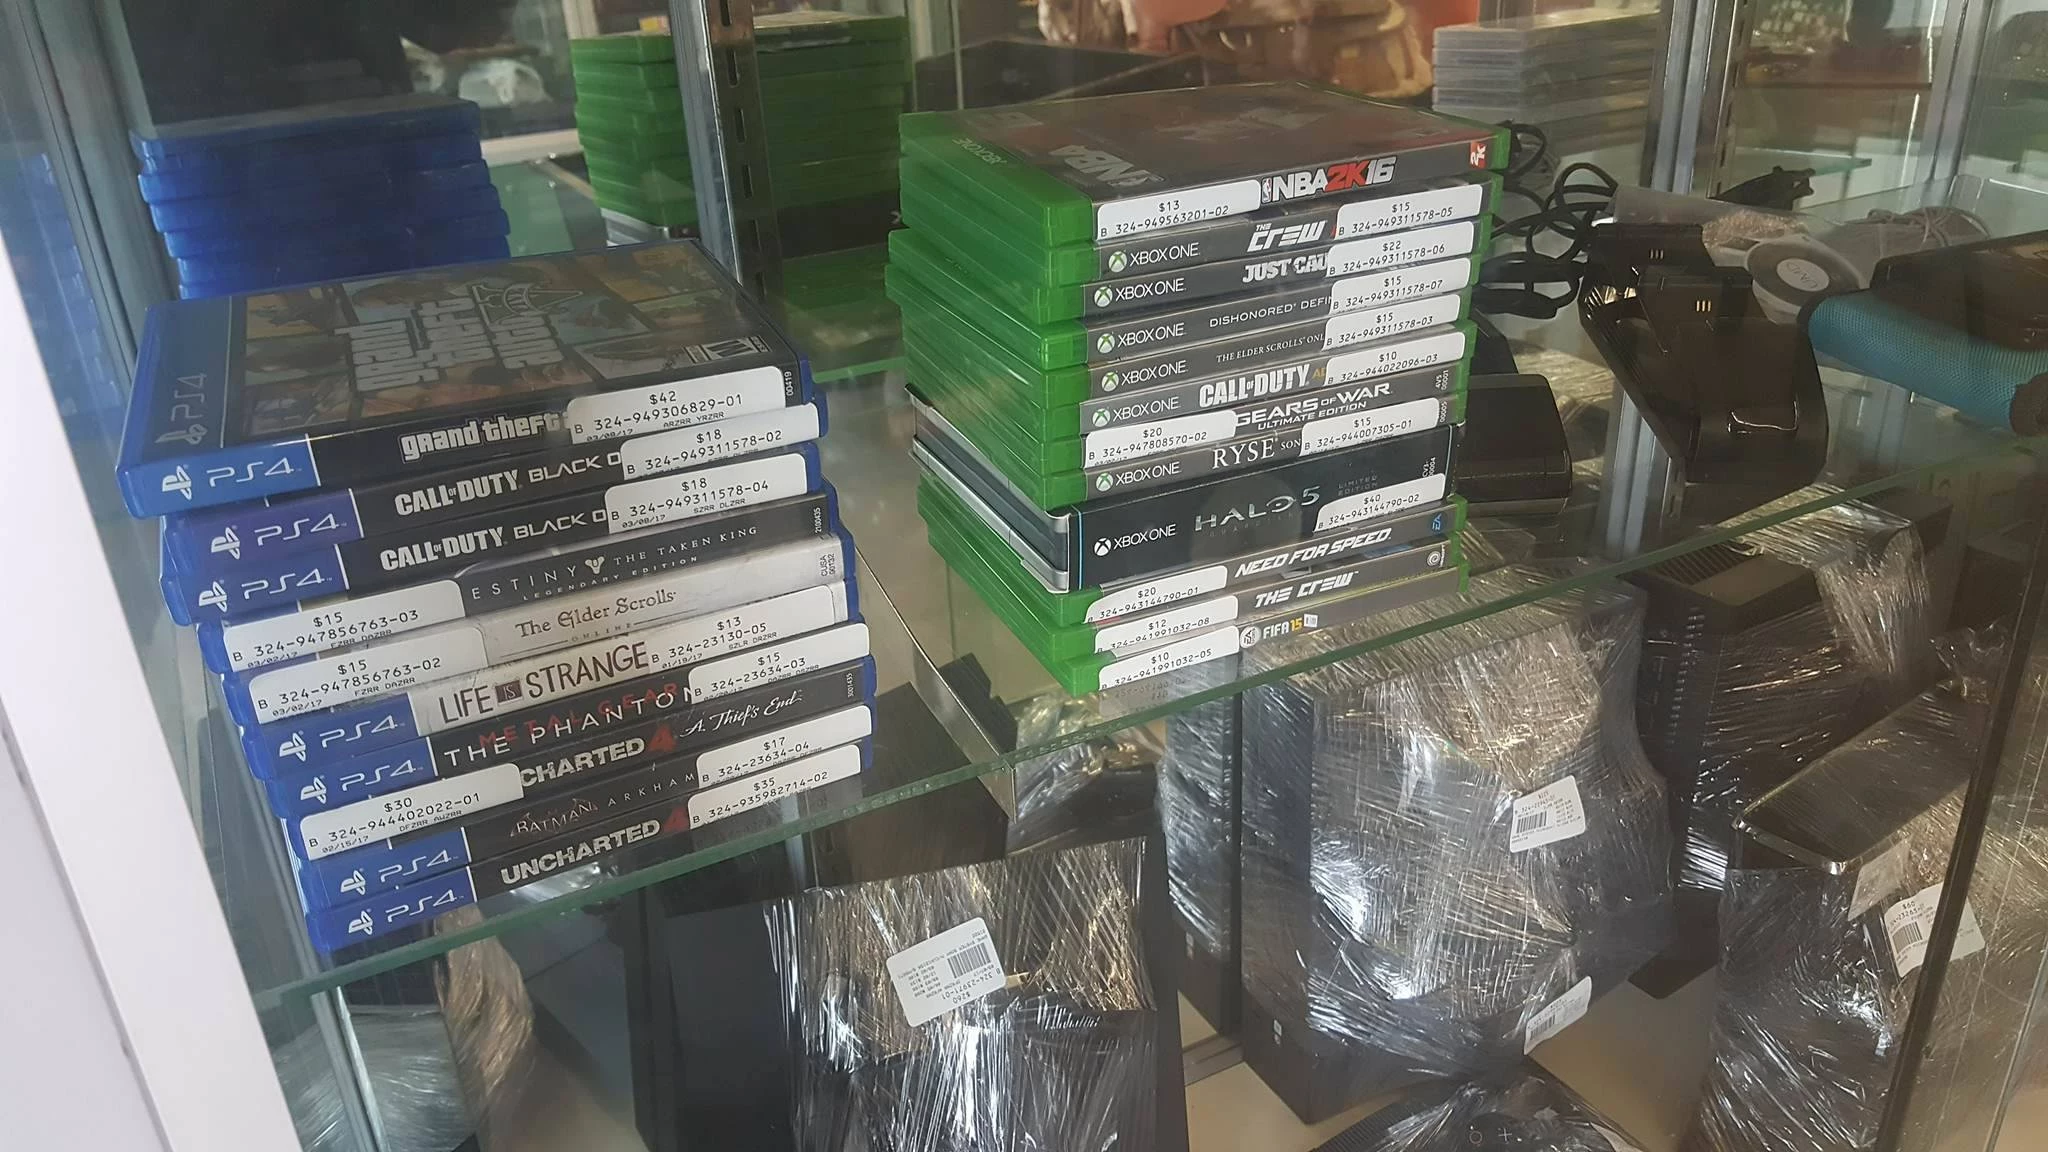 pawn shop ps4 games